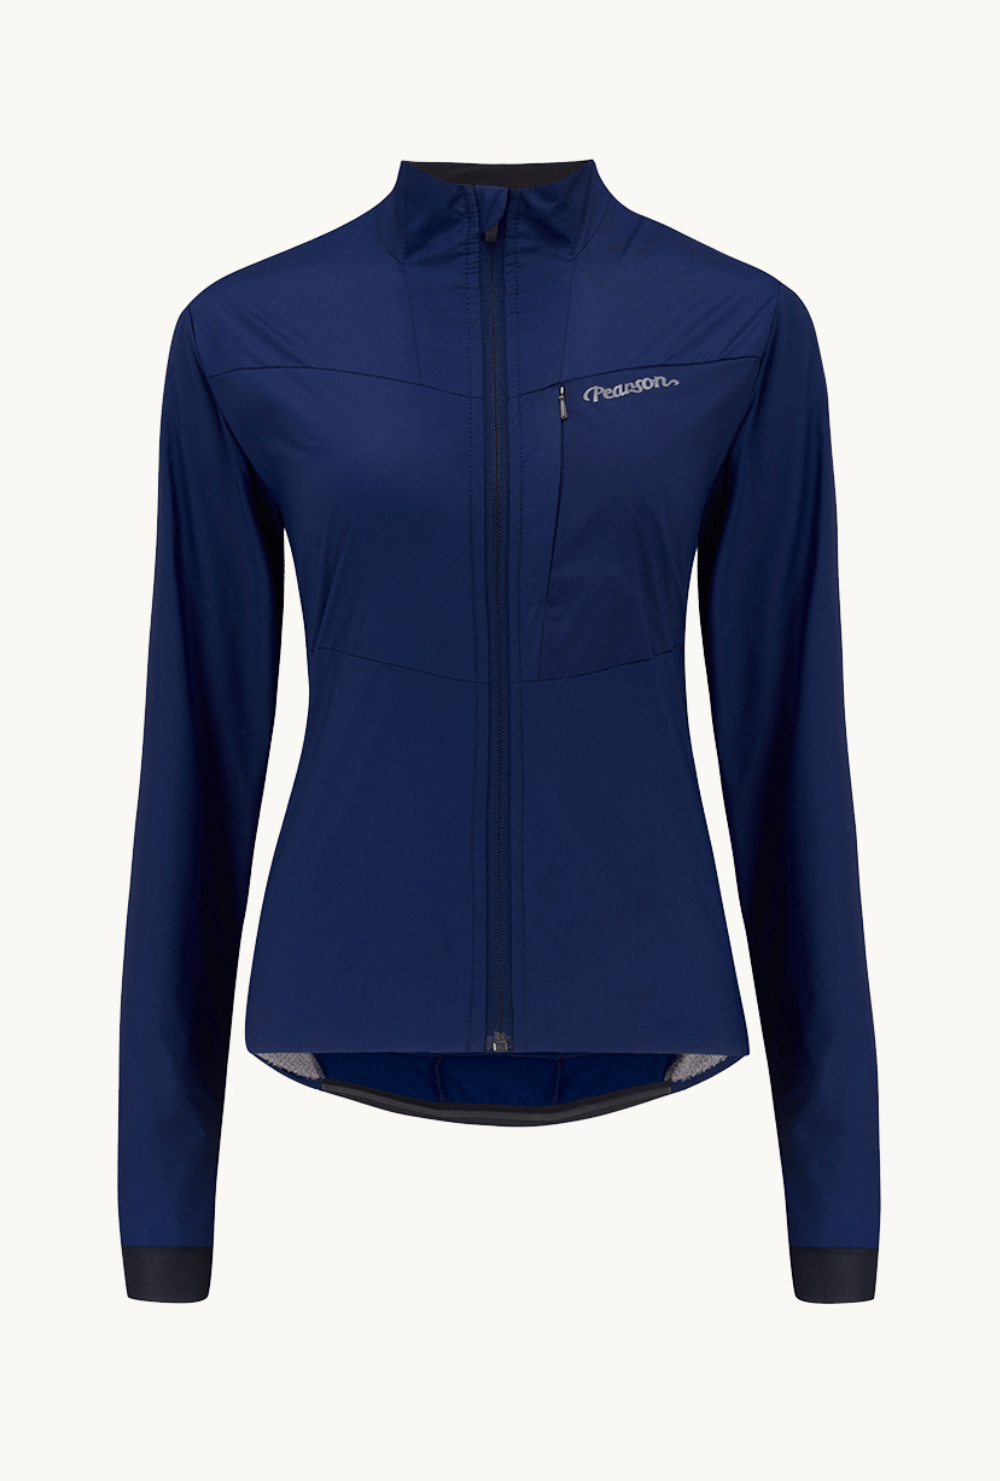 Pearson 1860  Test Your Mettle - Womens Road Insulated Jacket Blue Ink  Blue Ink / Large